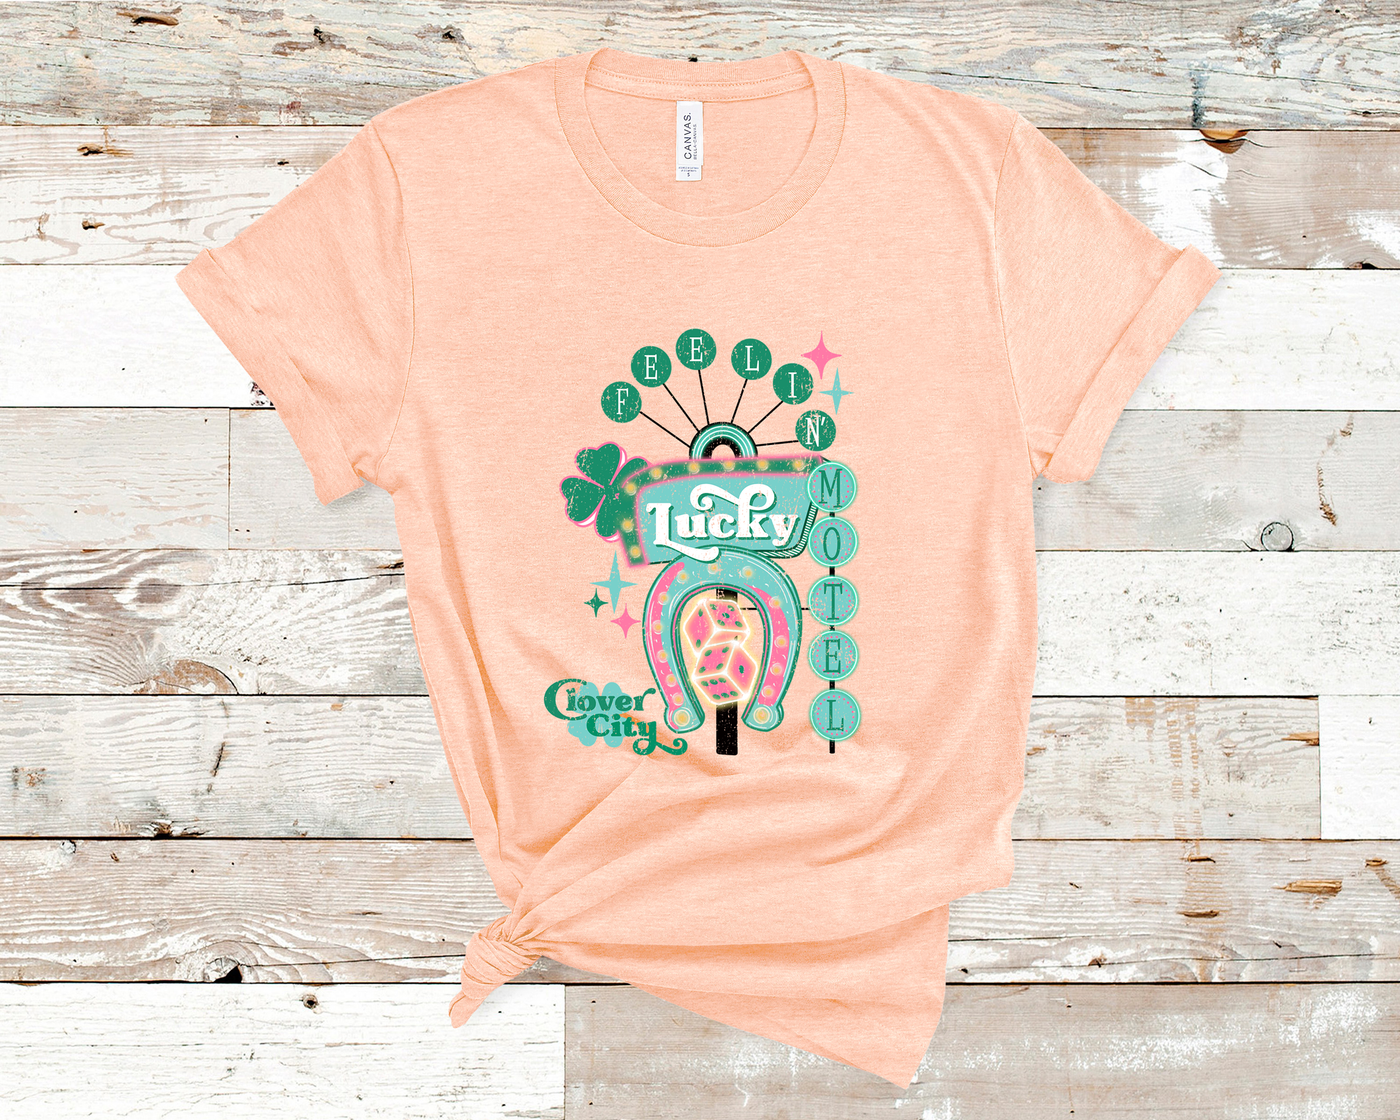 Heather Peach Tee. Graphic of a vintage Neon Sign The word feeling with each letter in green circles at the top with the word lucky down the side with each letter in a turquoise circle. There is a sign in the center with the word motel in it, underneath there is a horse shoe with dice inside at he bottom of the sign. There is also a four leaf clover with the word clover city over it in green.